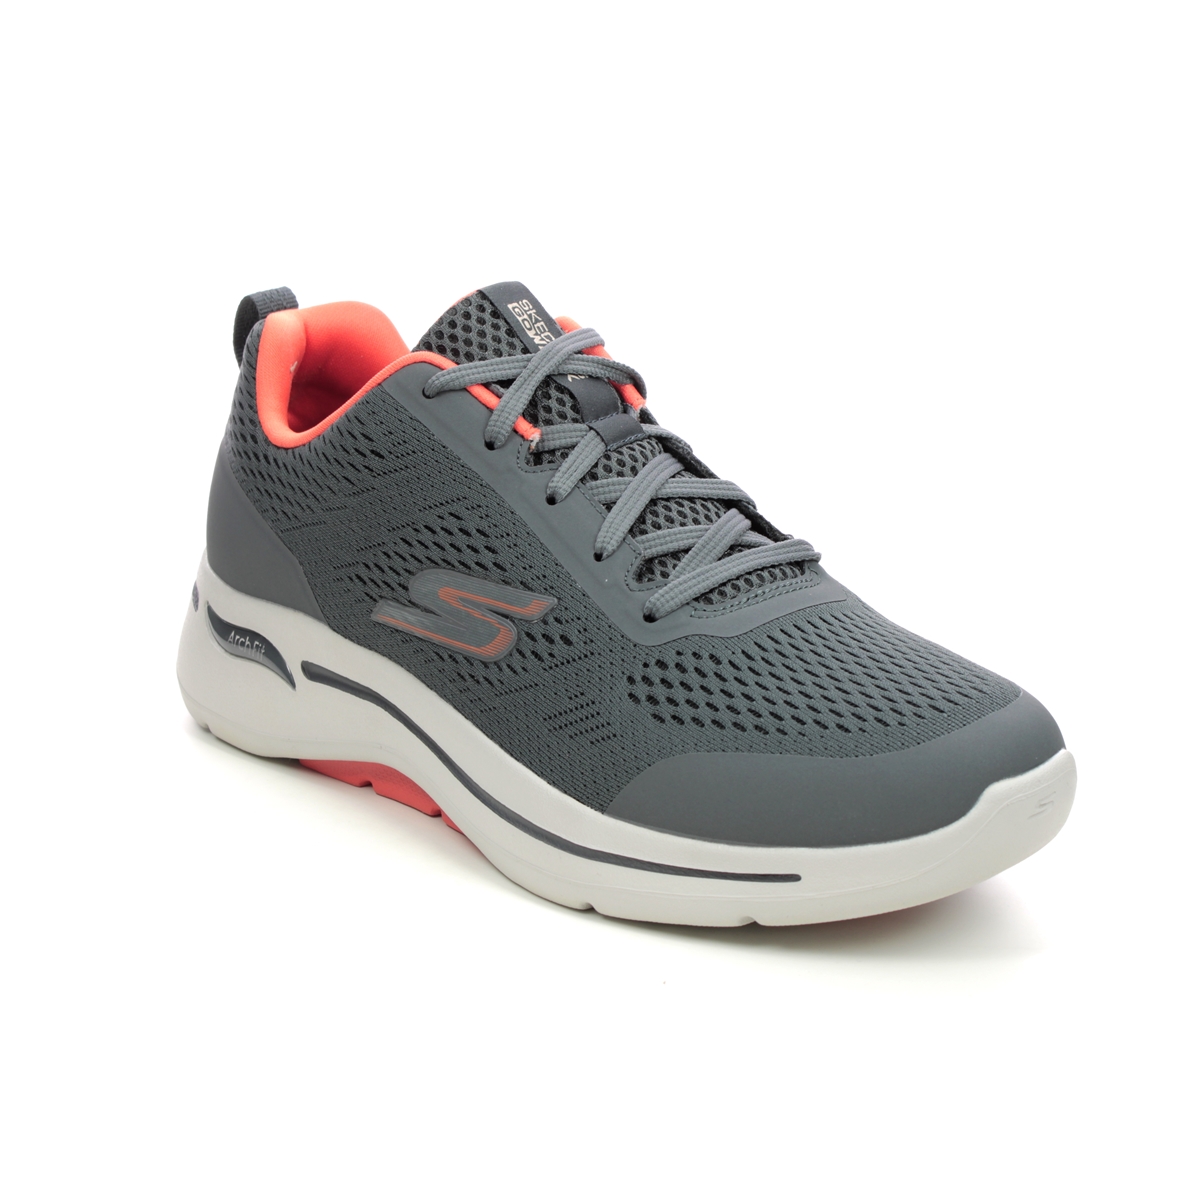 Skechers Arch Fit Go Walk Charcoal Grey Mens Trainers 216116 In Size 9.5 In Plain Charcoal Grey